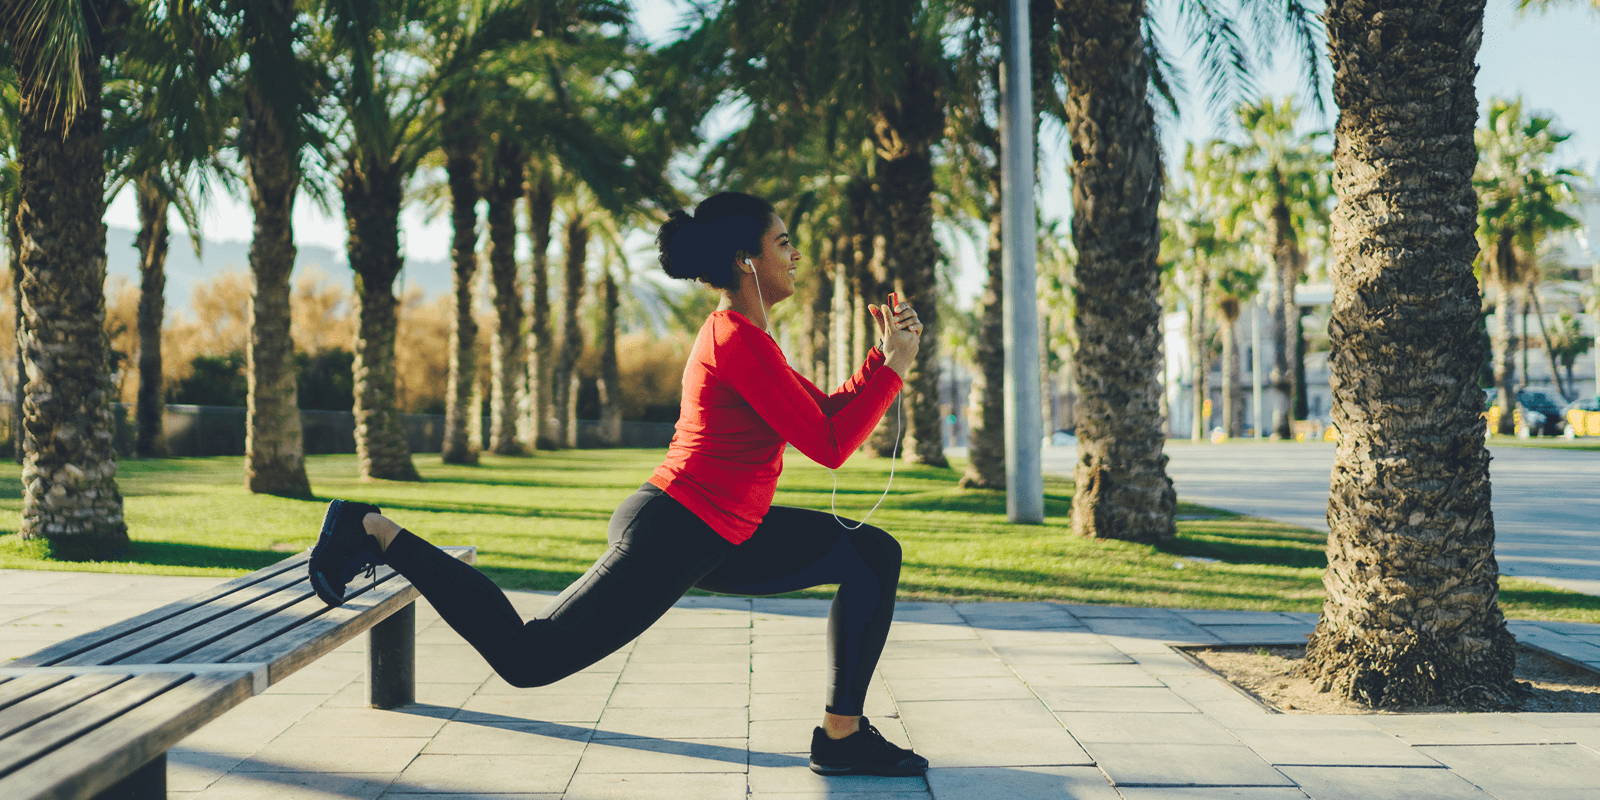 Woman doing yoga in a park.